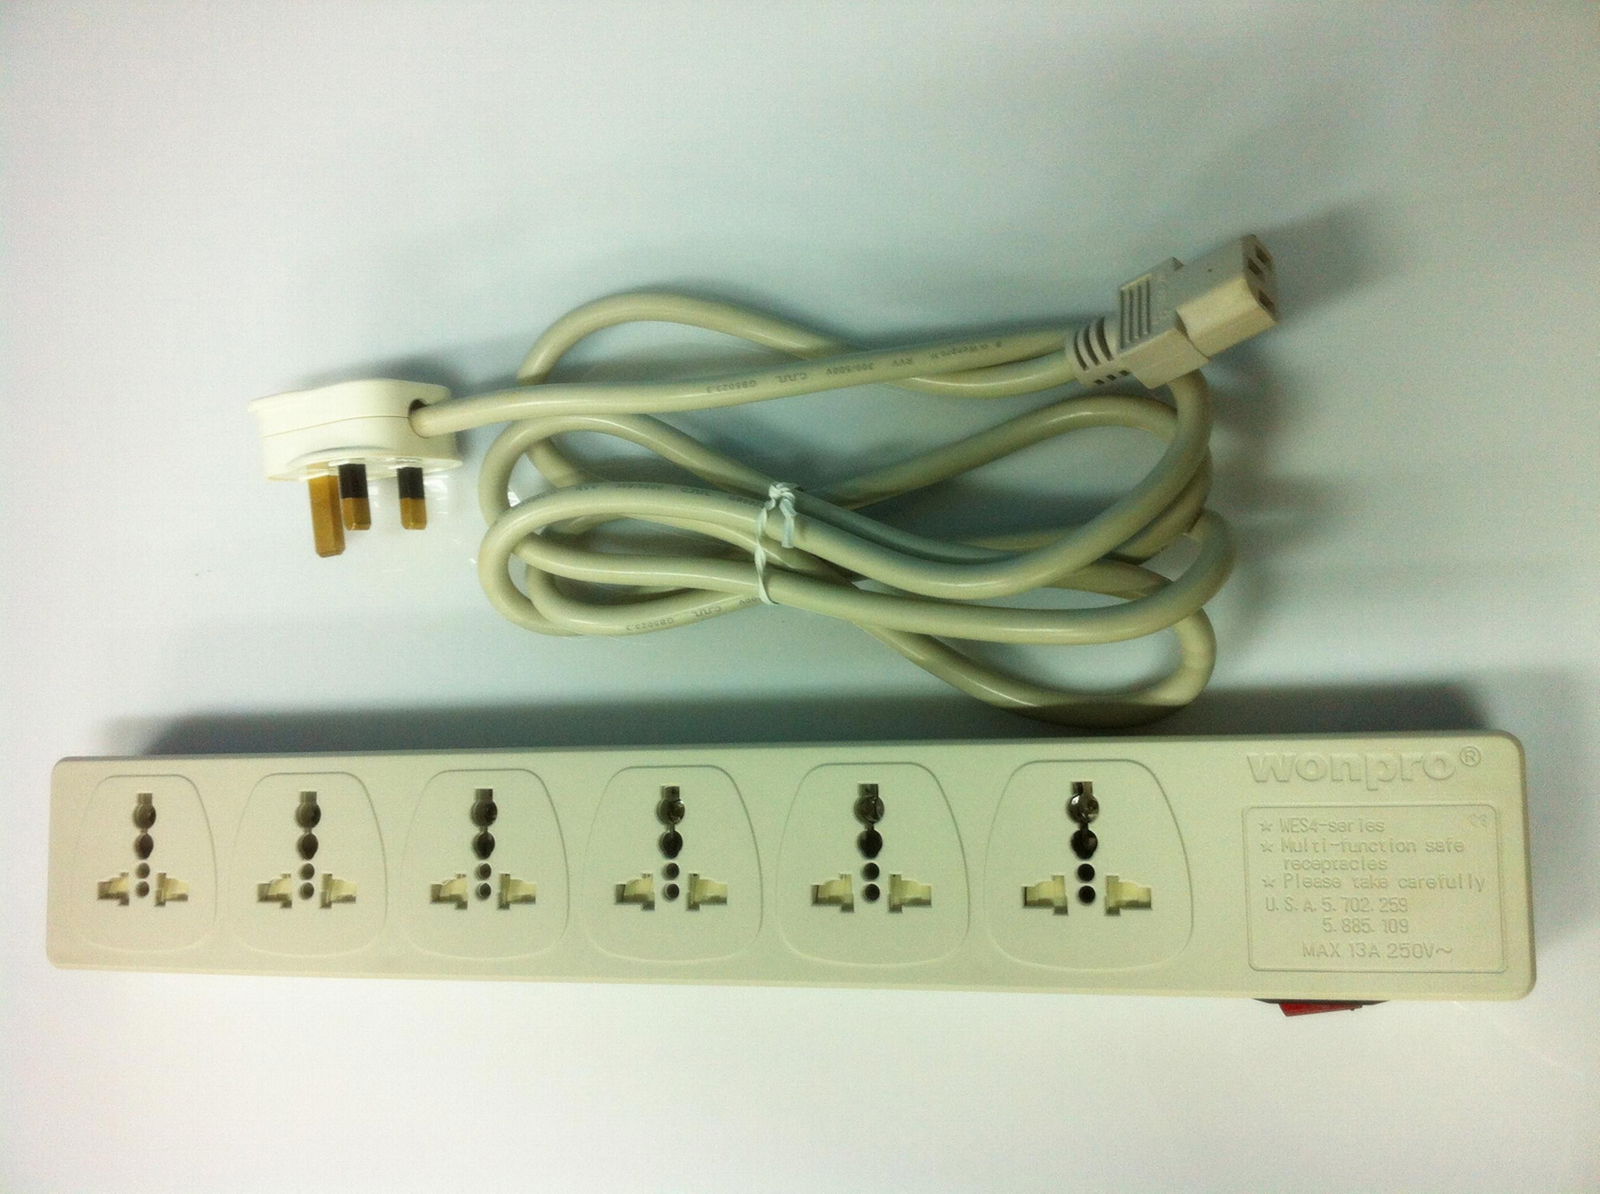 6 gang universal outlet power strip with IEC C14 port